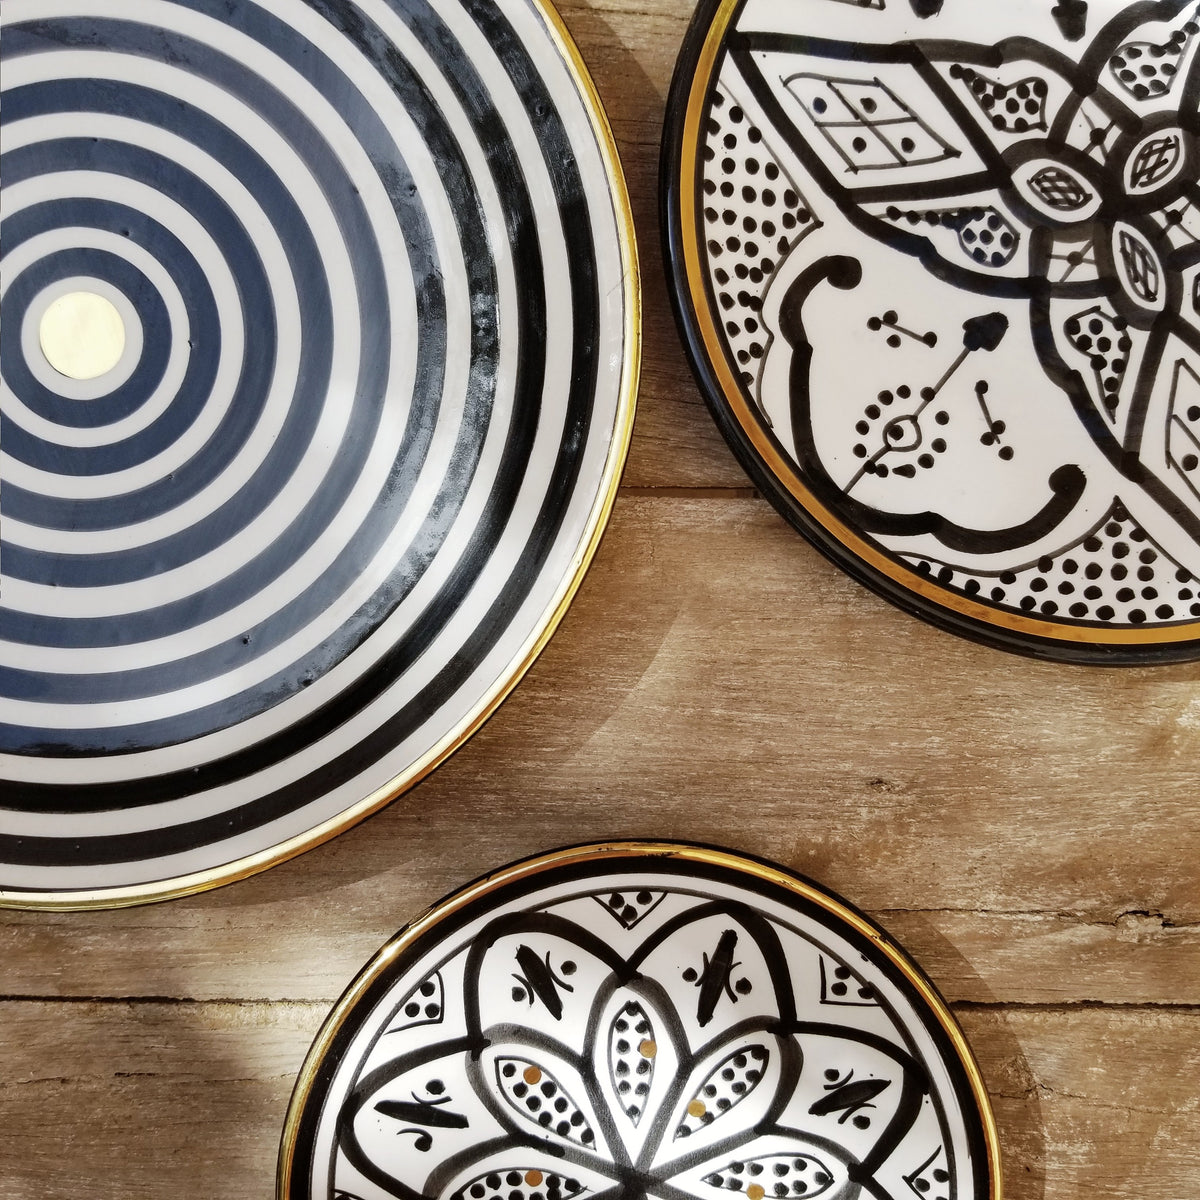 Black & Gold Striped Plate - 4 Sizes